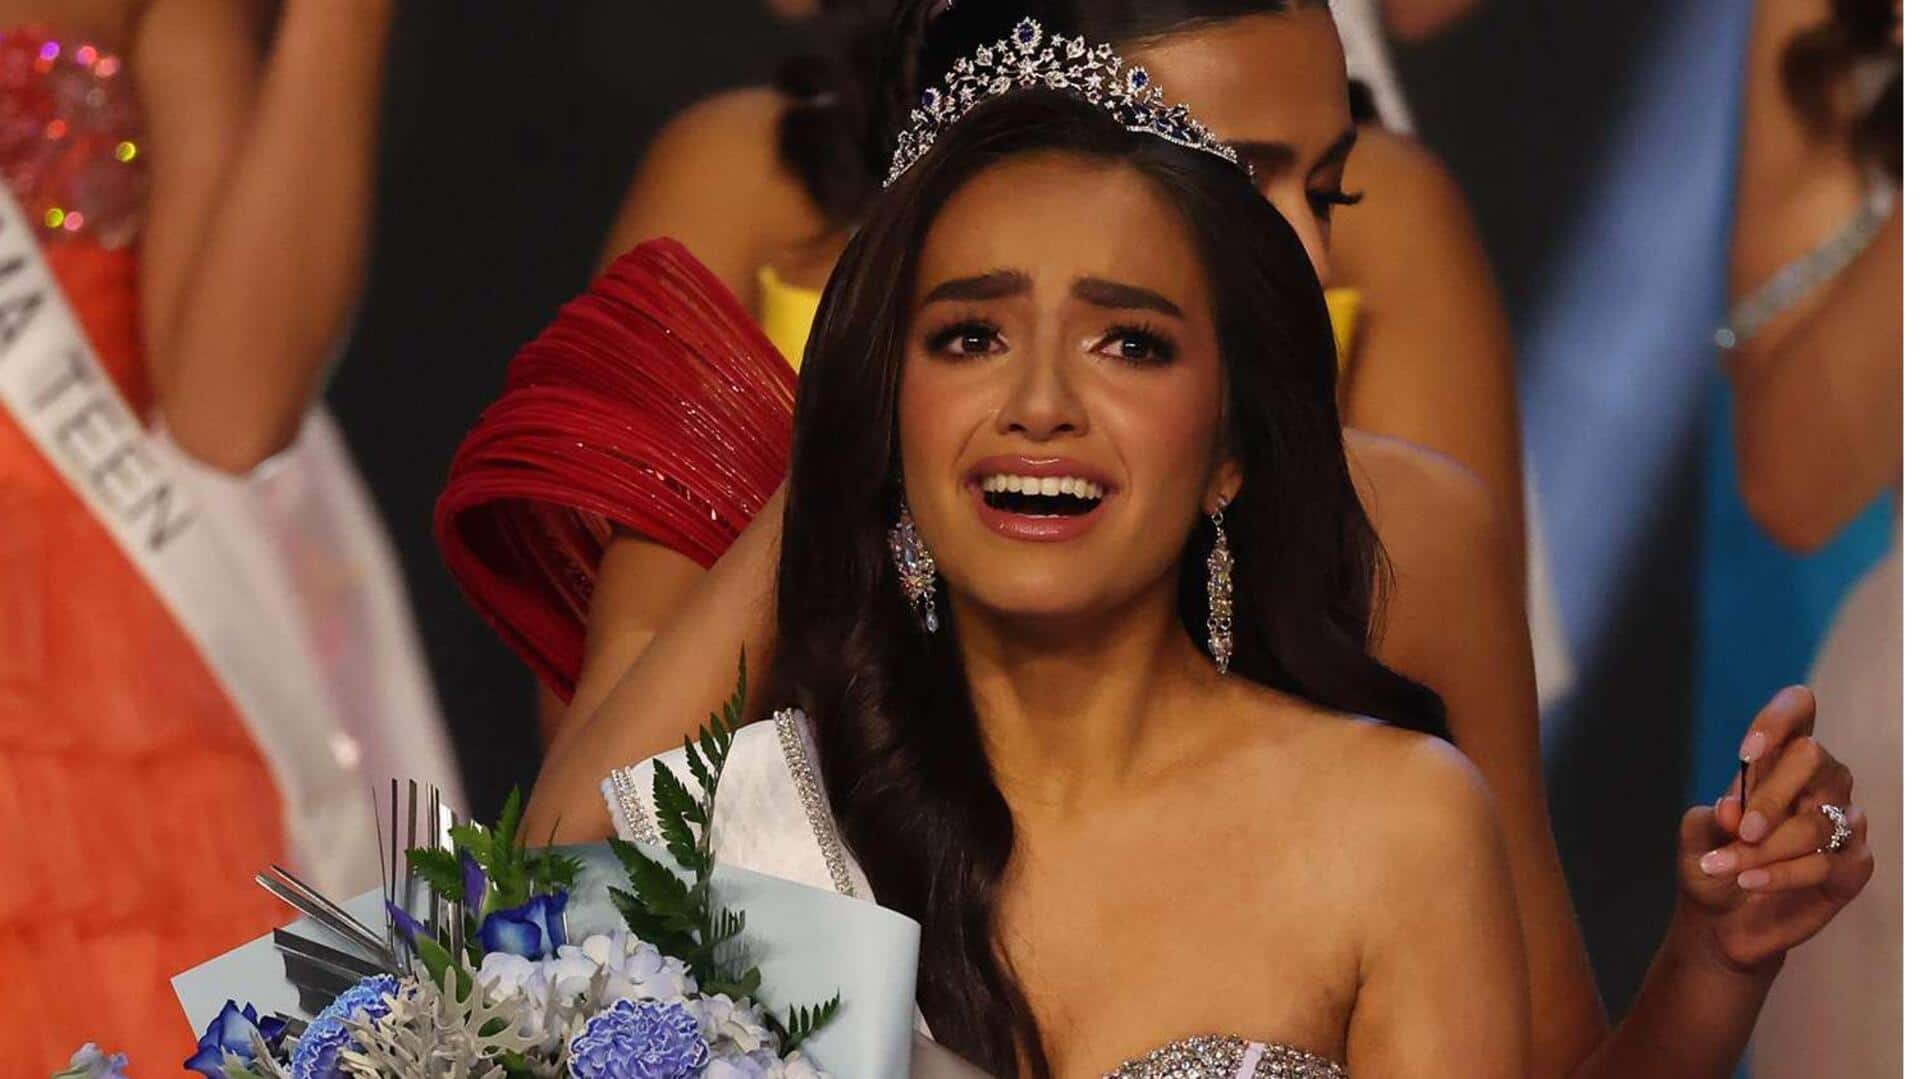 Two days after Miss USA, Indian-origin Miss Teen USA resigns